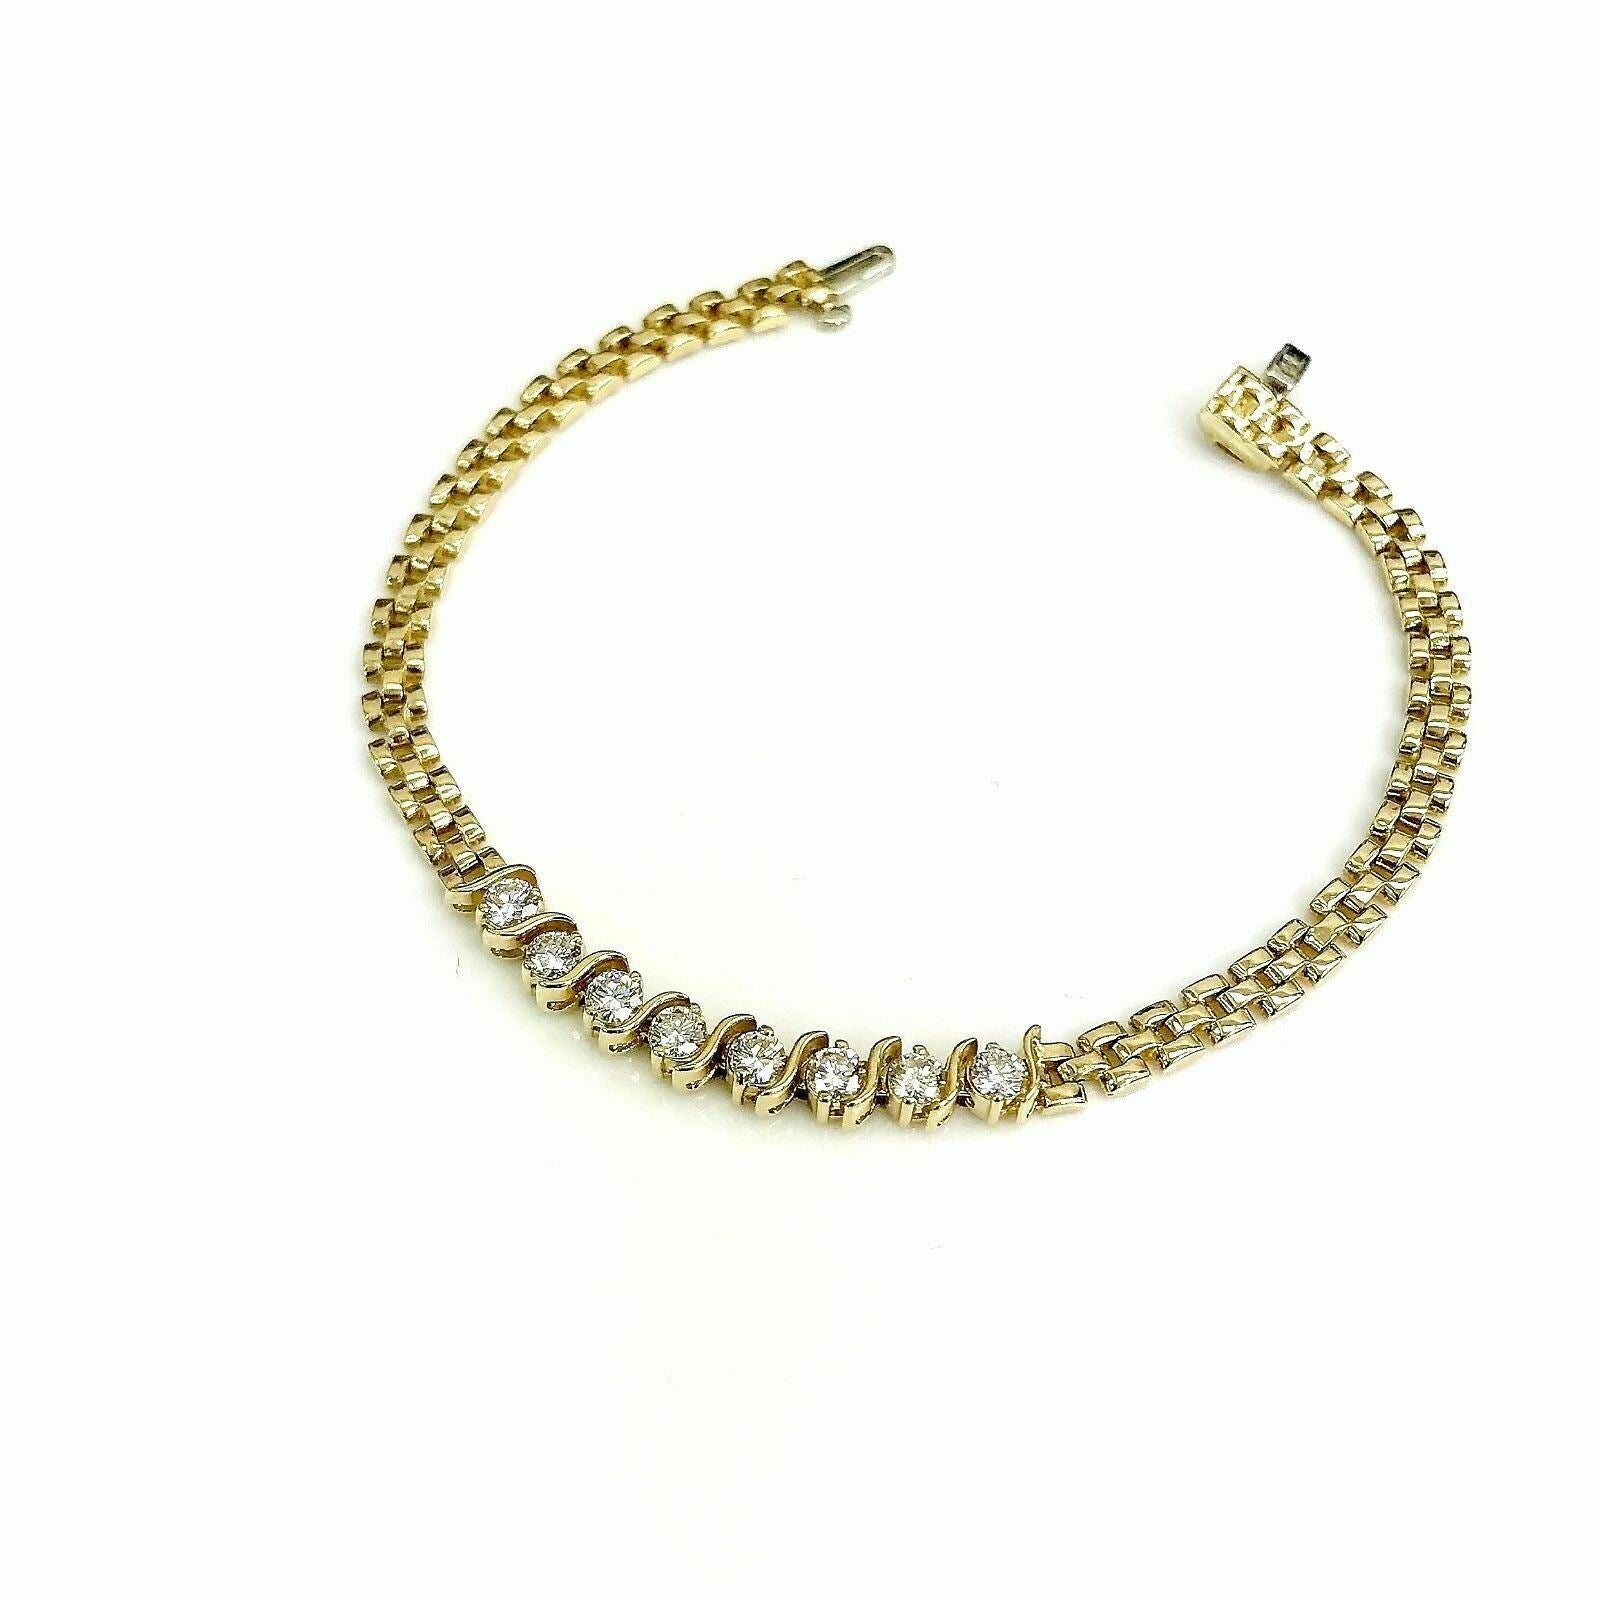 1.10Cts Round Diamond S Style Link Tennis Bracelet 14K Yelow Gold 7 Inches Long